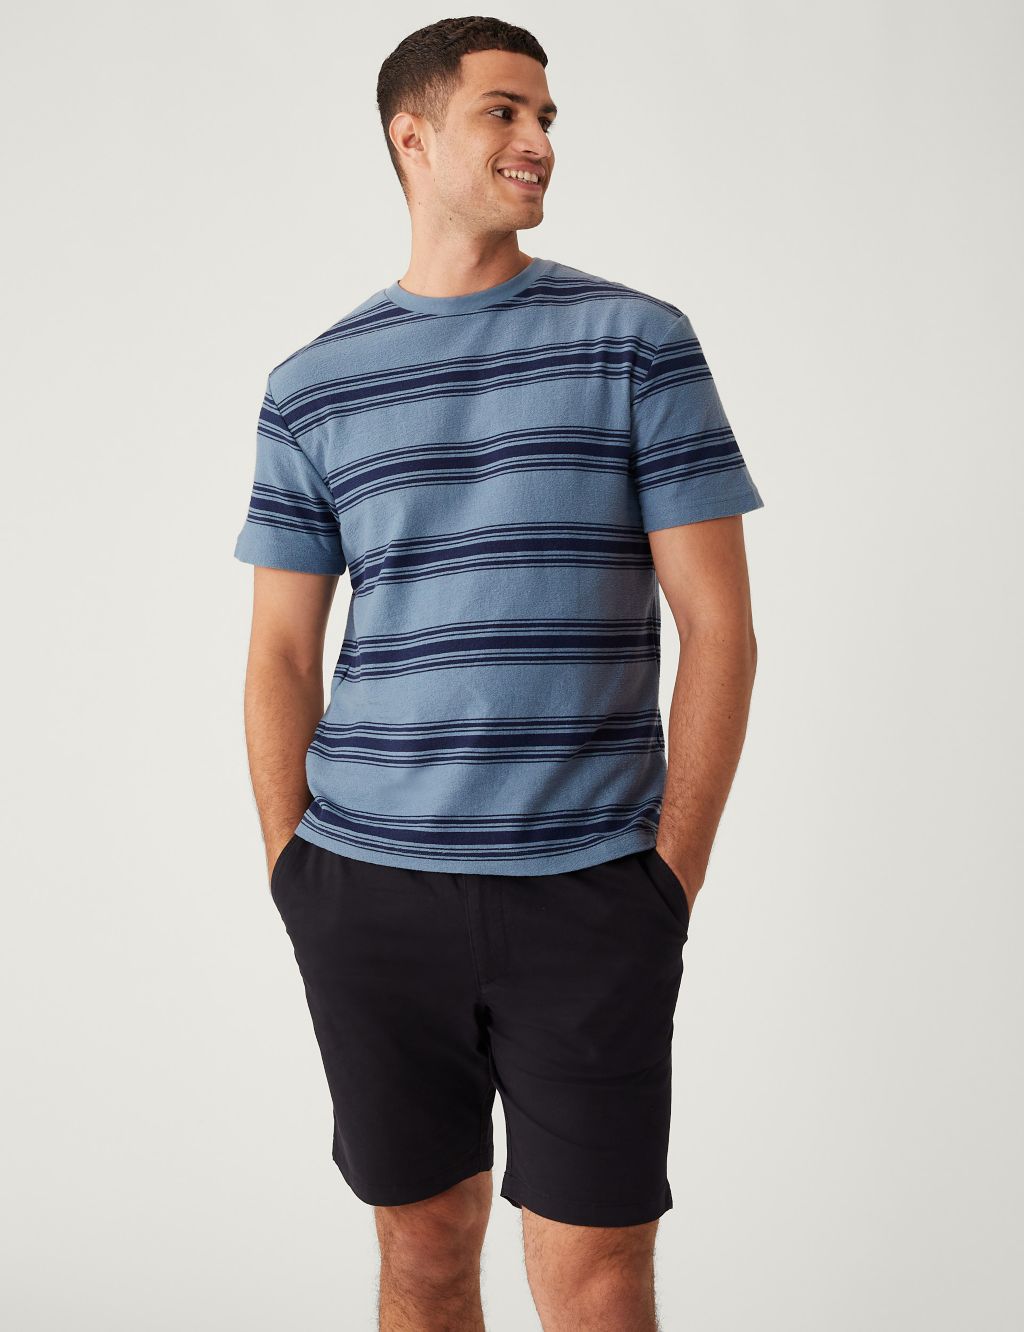 Relaxed Fit Pure Cotton Striped T-Shirt image 3